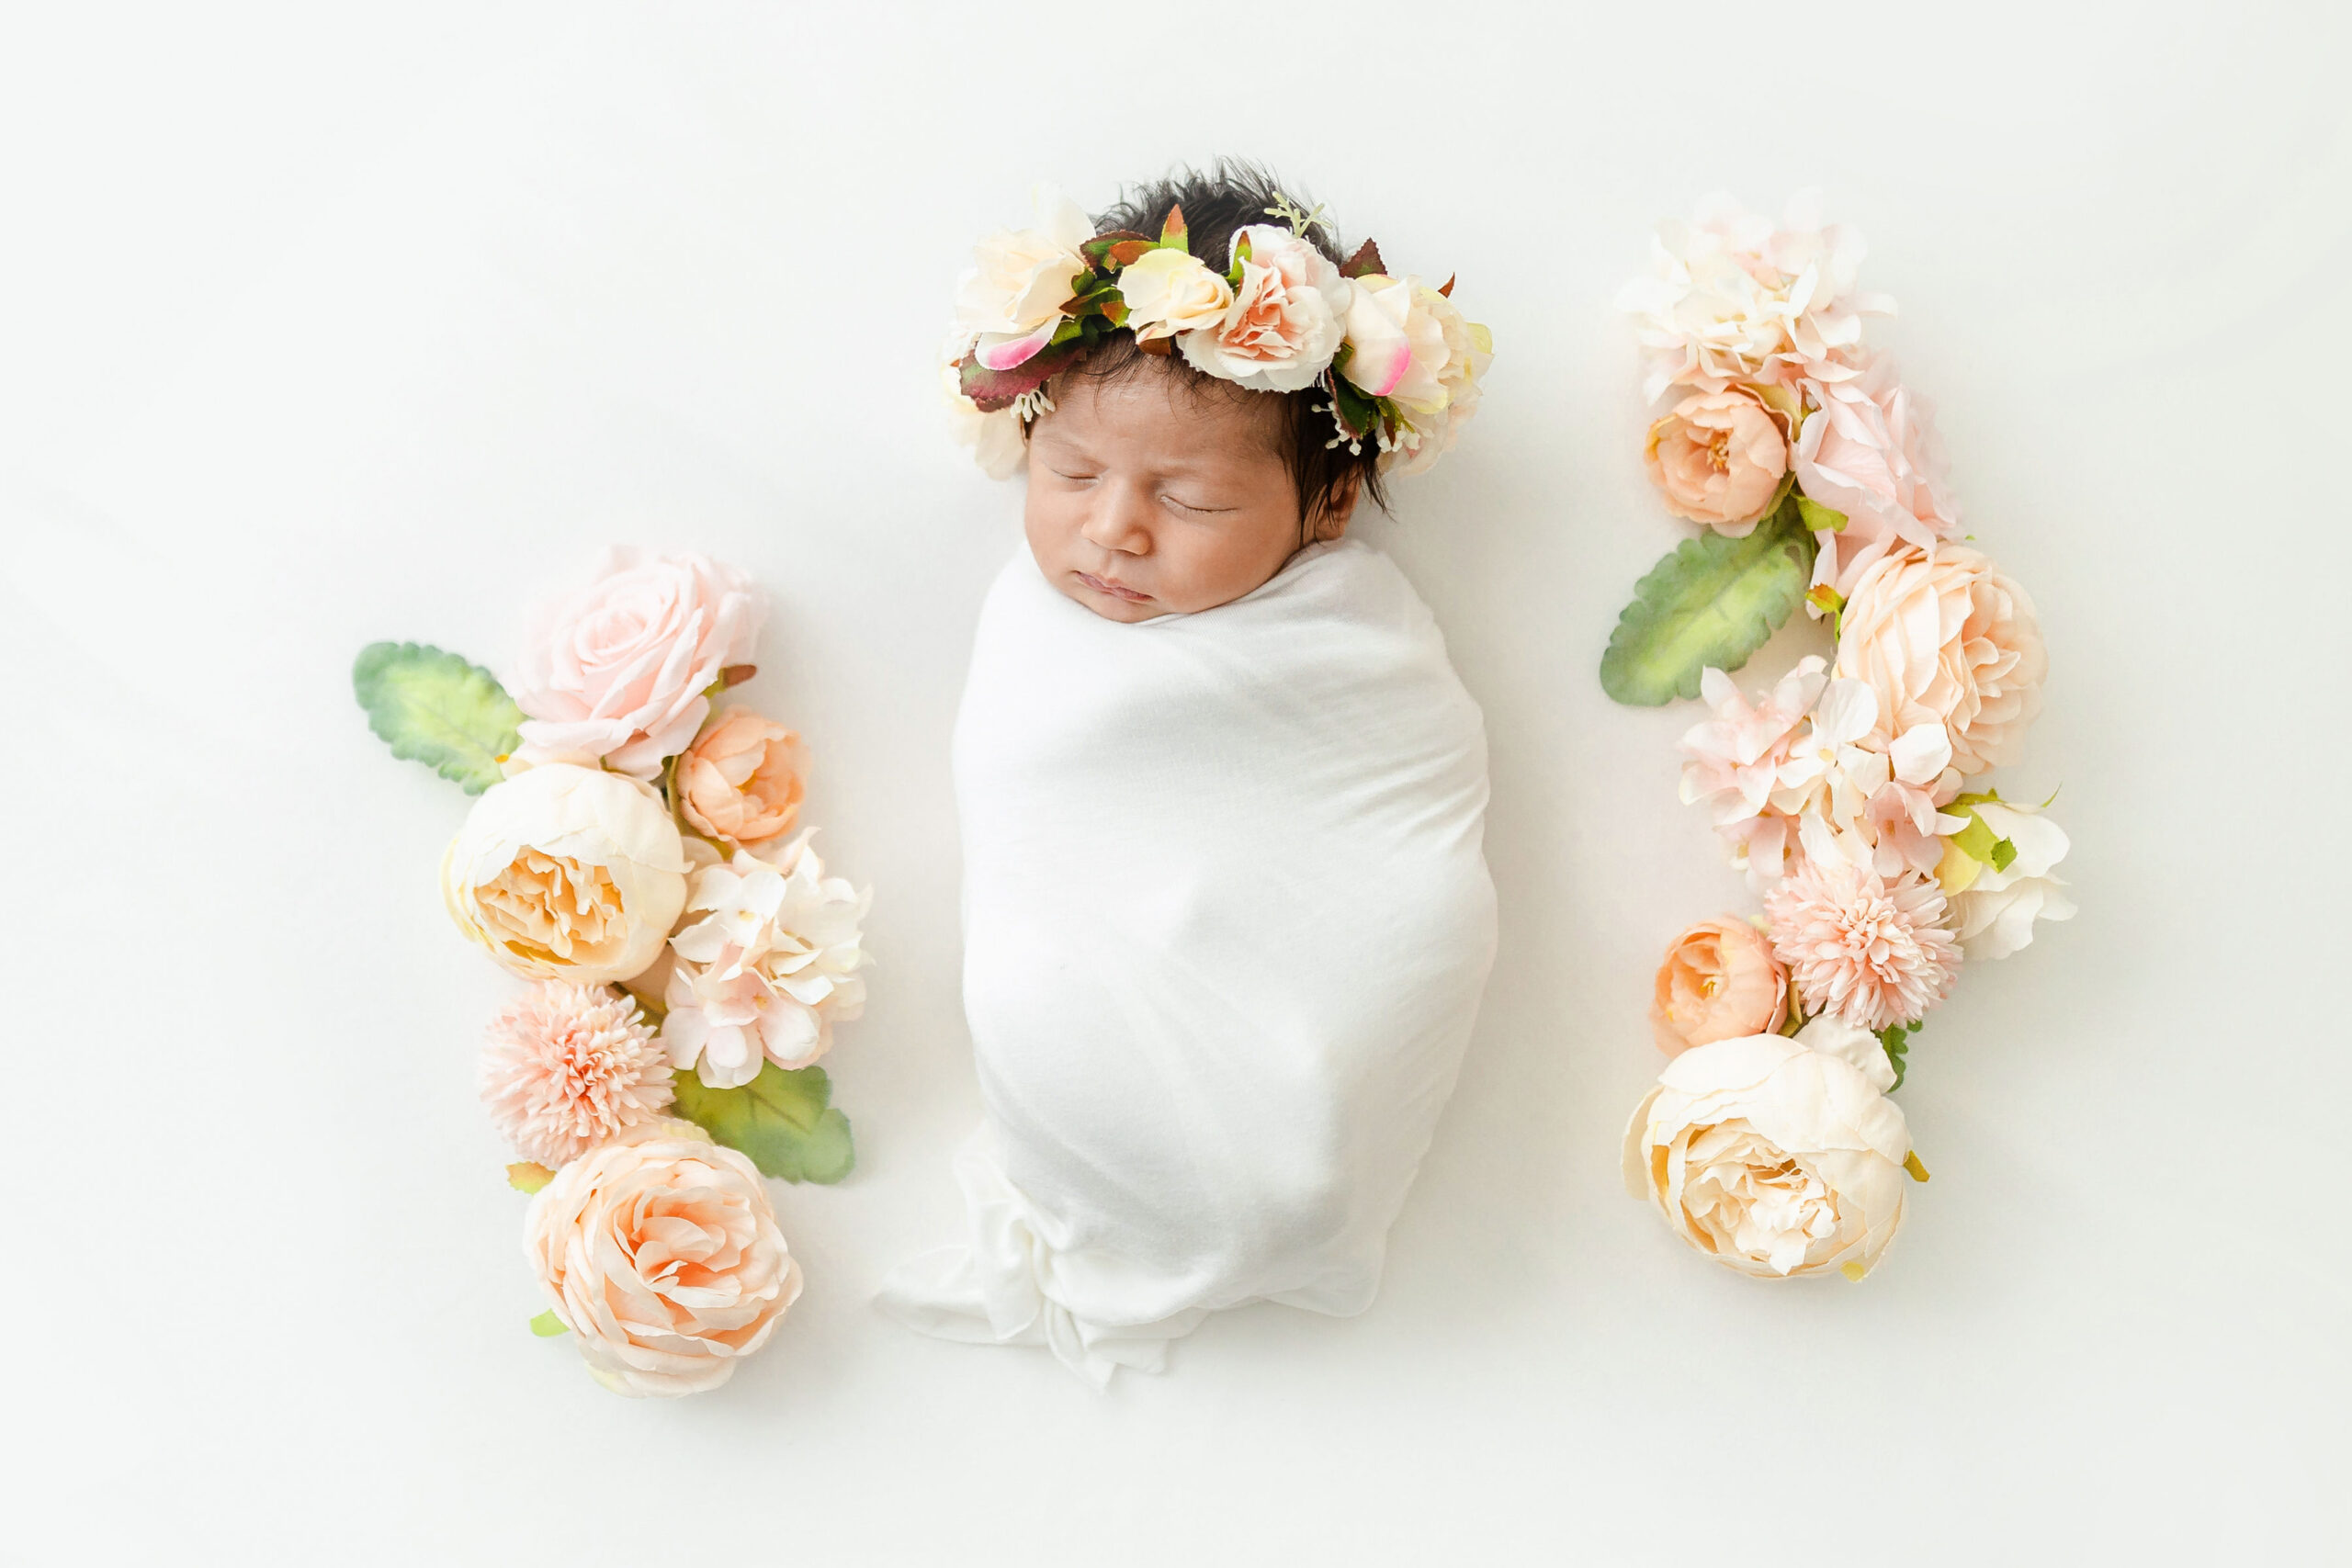 A newborn baby sleeps in a white swaddle and floral headband surrounded by matching flowers in a studio thanks to mom's breast friend